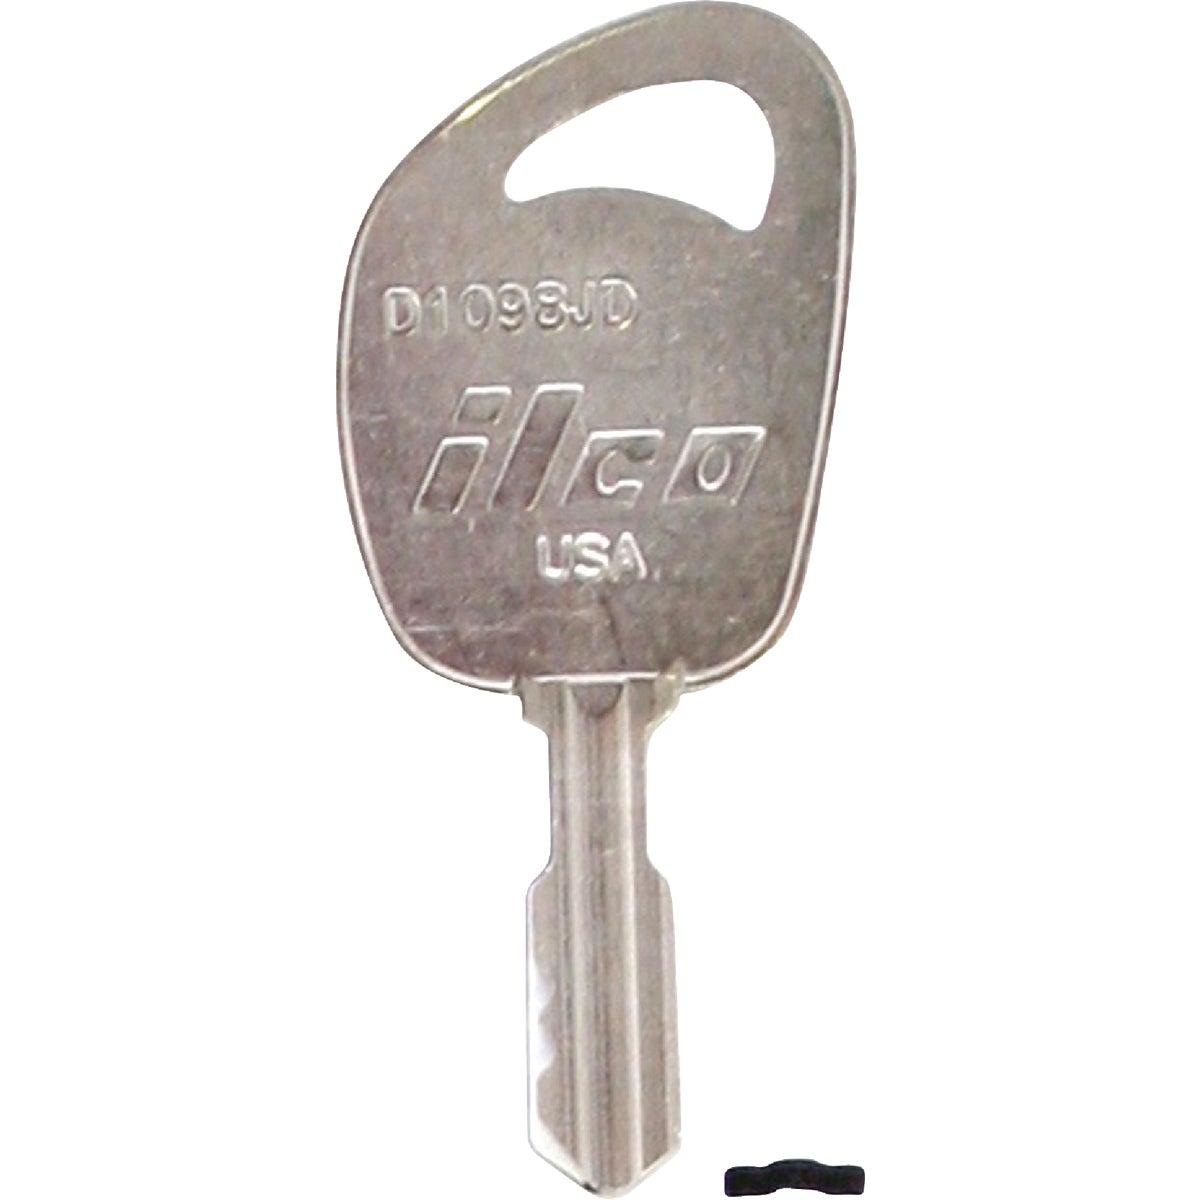 Item 235392, Nickel-plated key blank. When you order one, you will receive 10 keys.